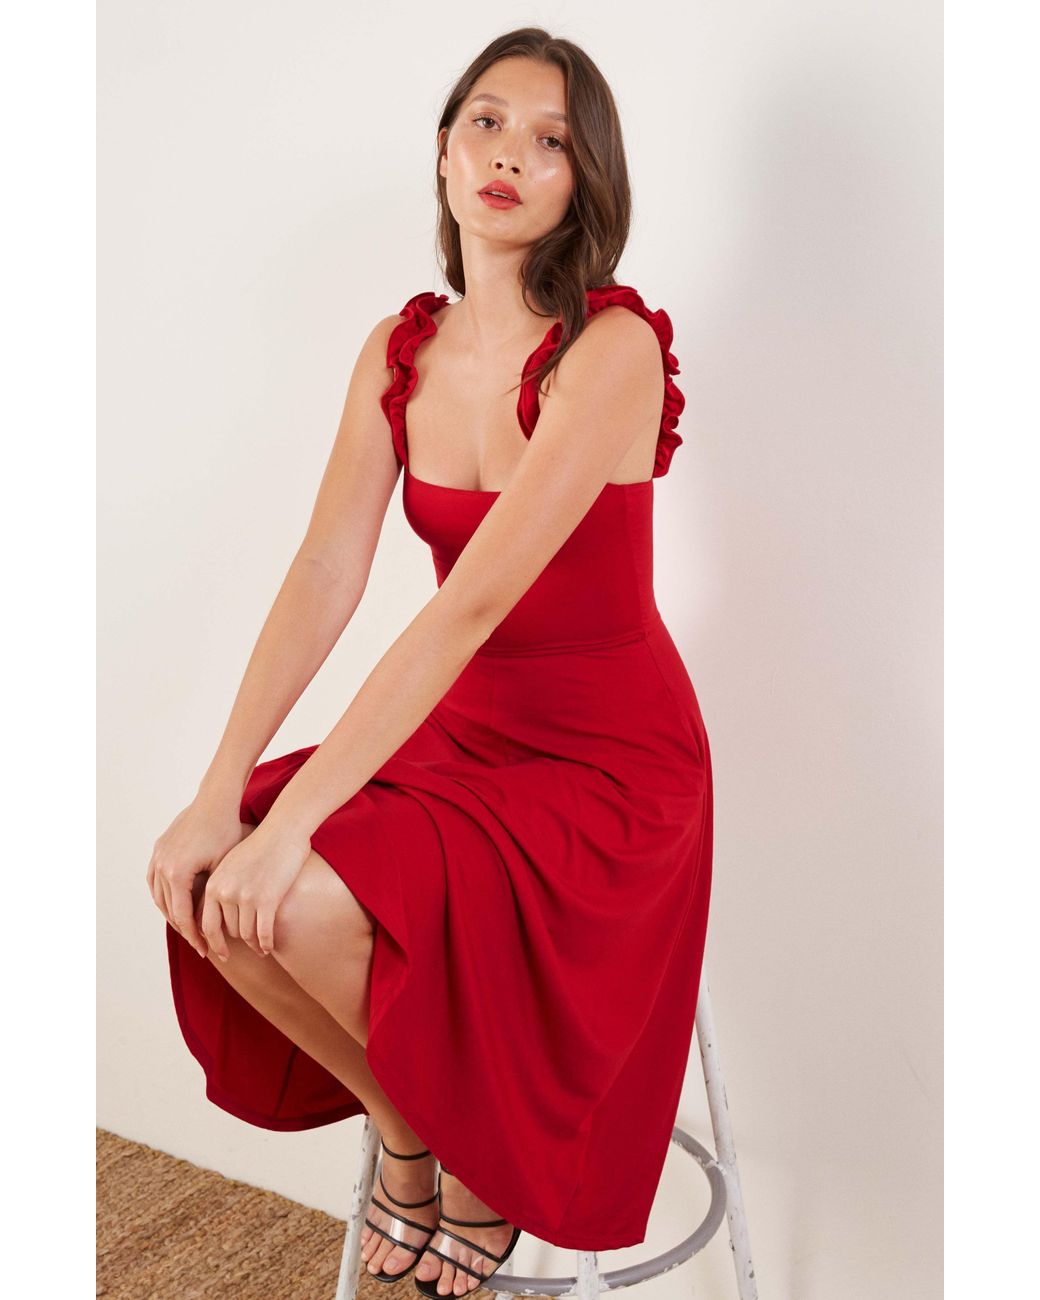 Reformation Eda Ruffle Strap Dress in Red